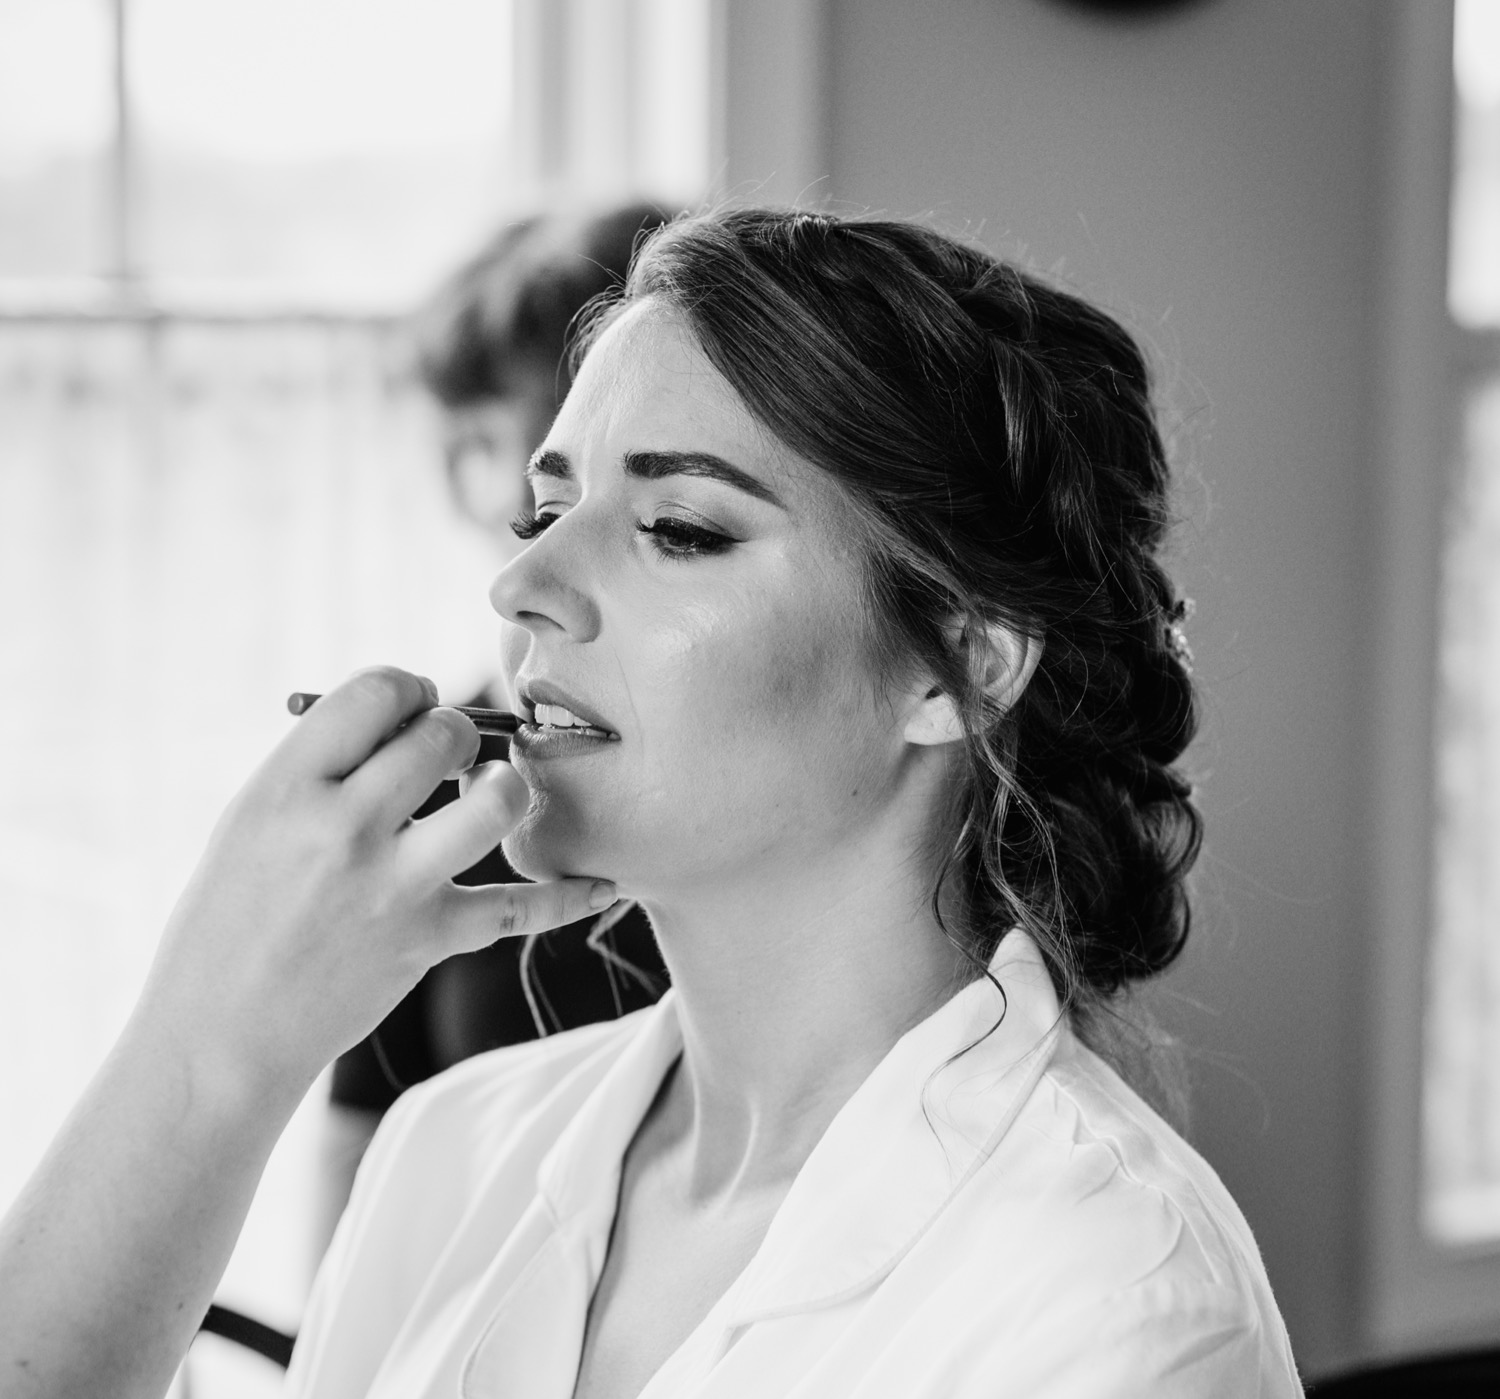 Bride finishing the makeup process before her wedding